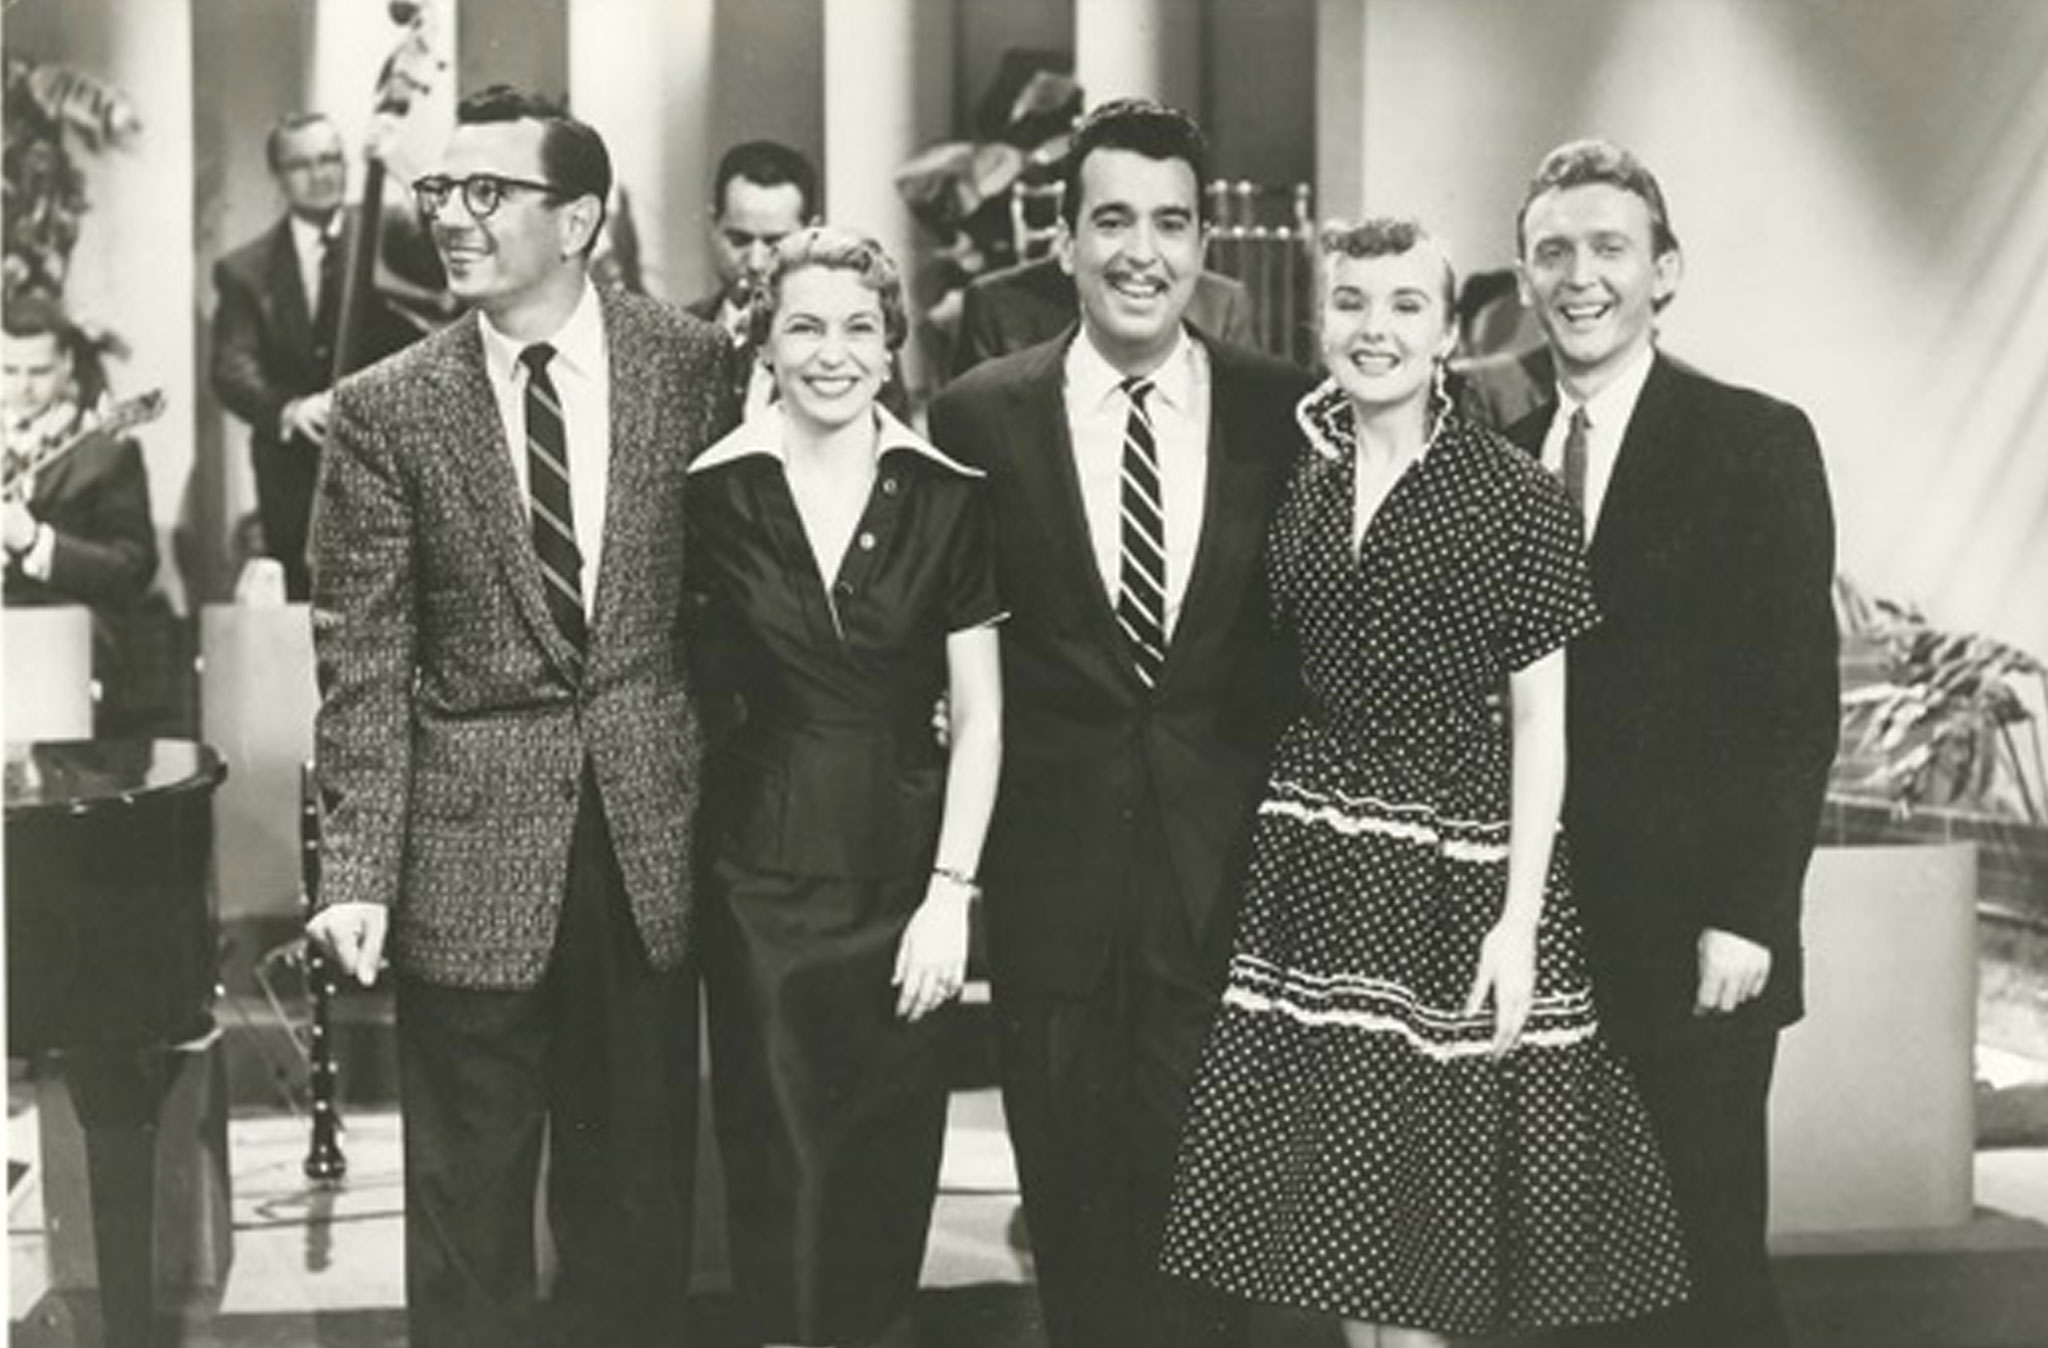 Tennessee ernie ford show cast #2